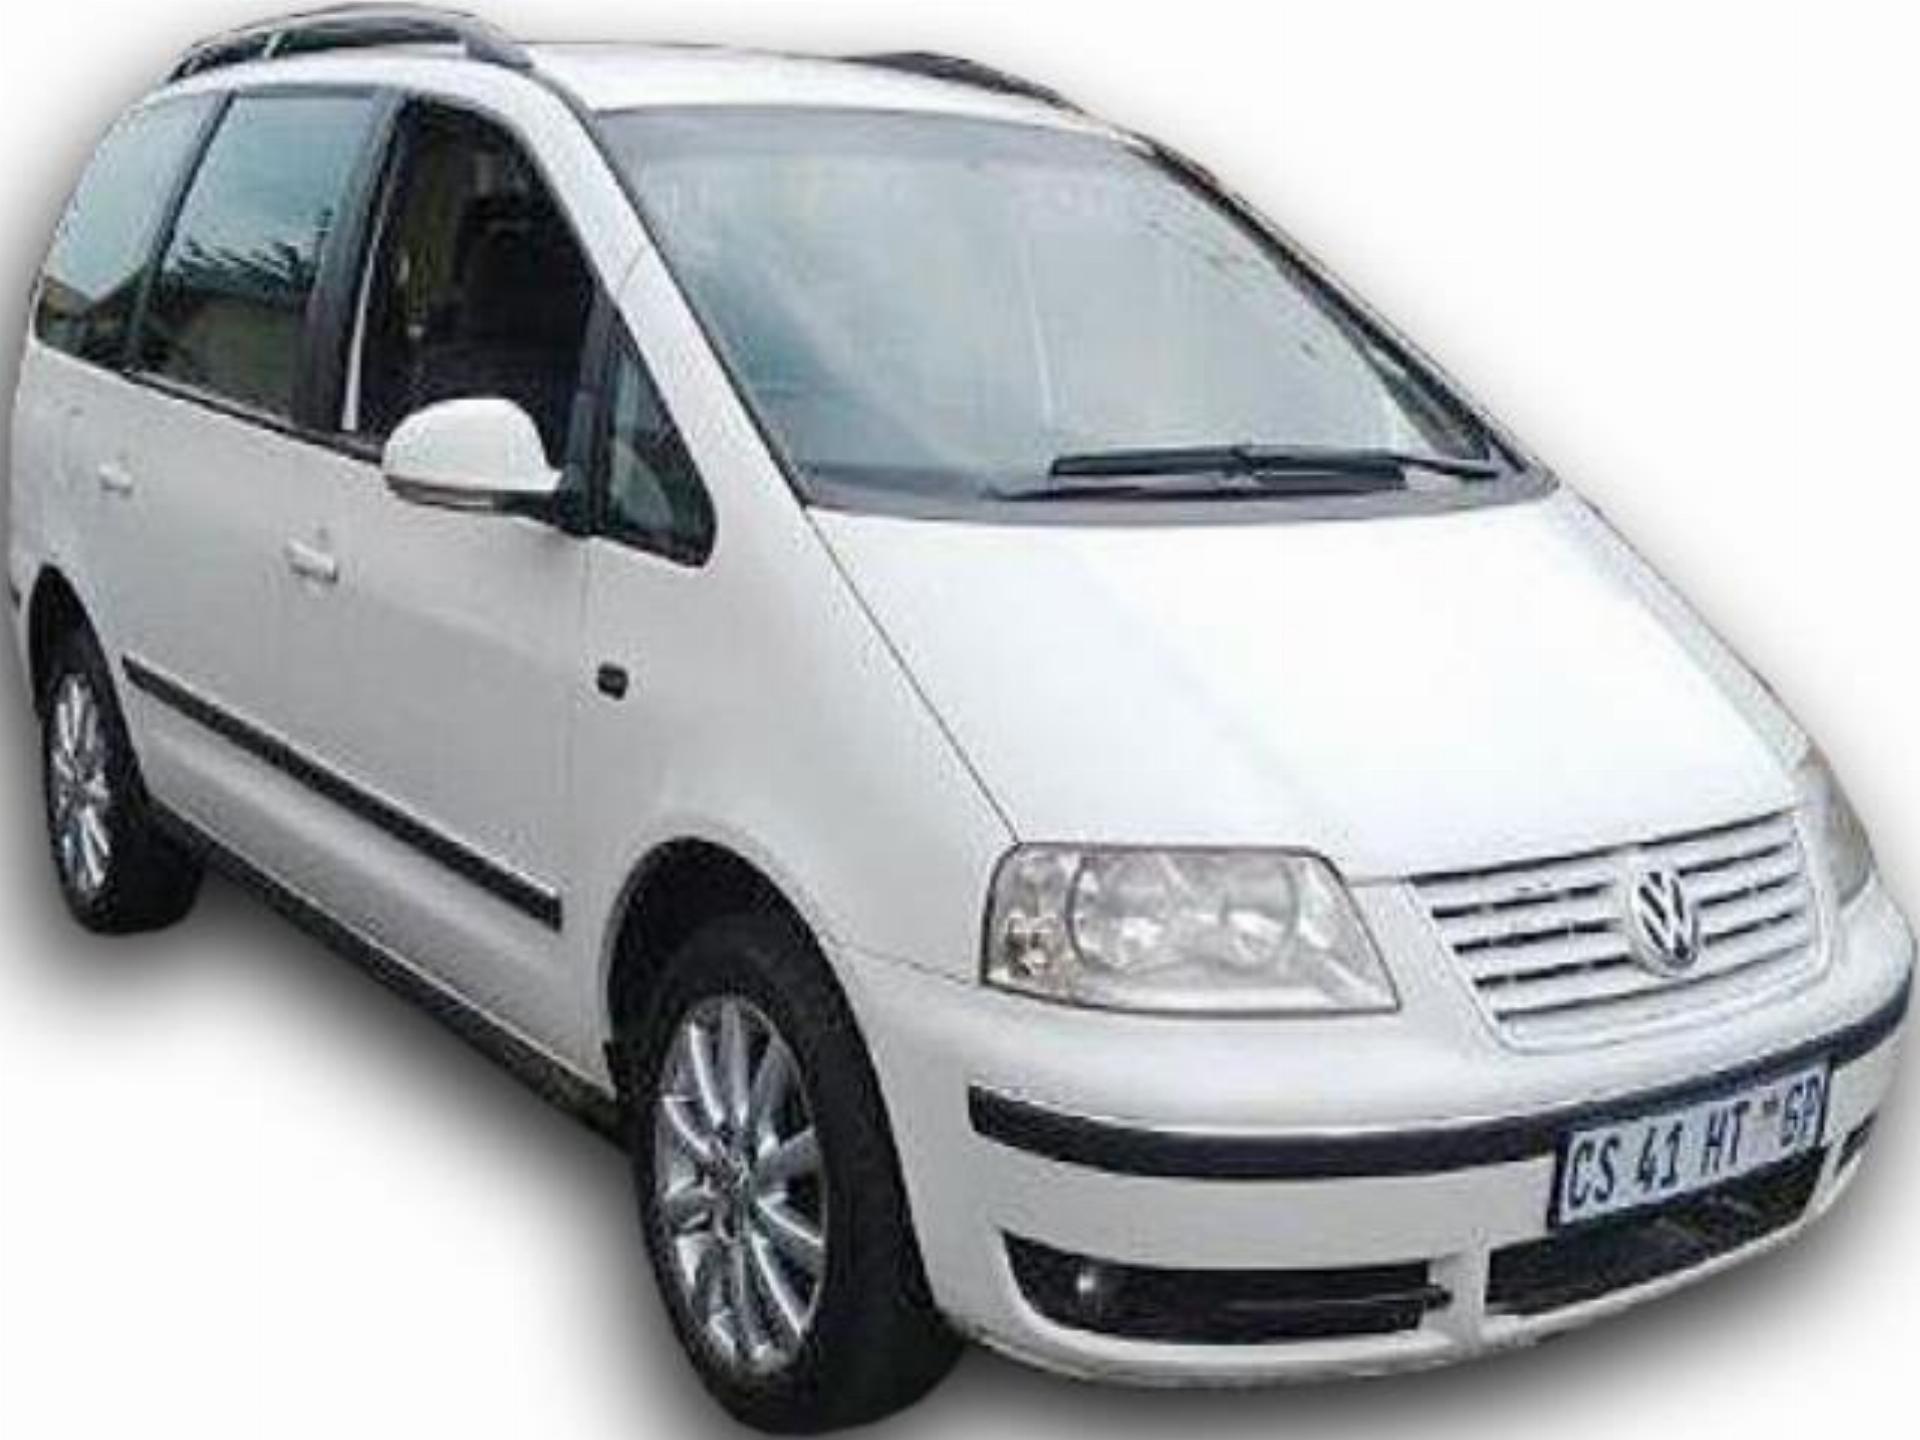 Used Volkswagen Sharan 1.8T 2006 on auction PV1015141